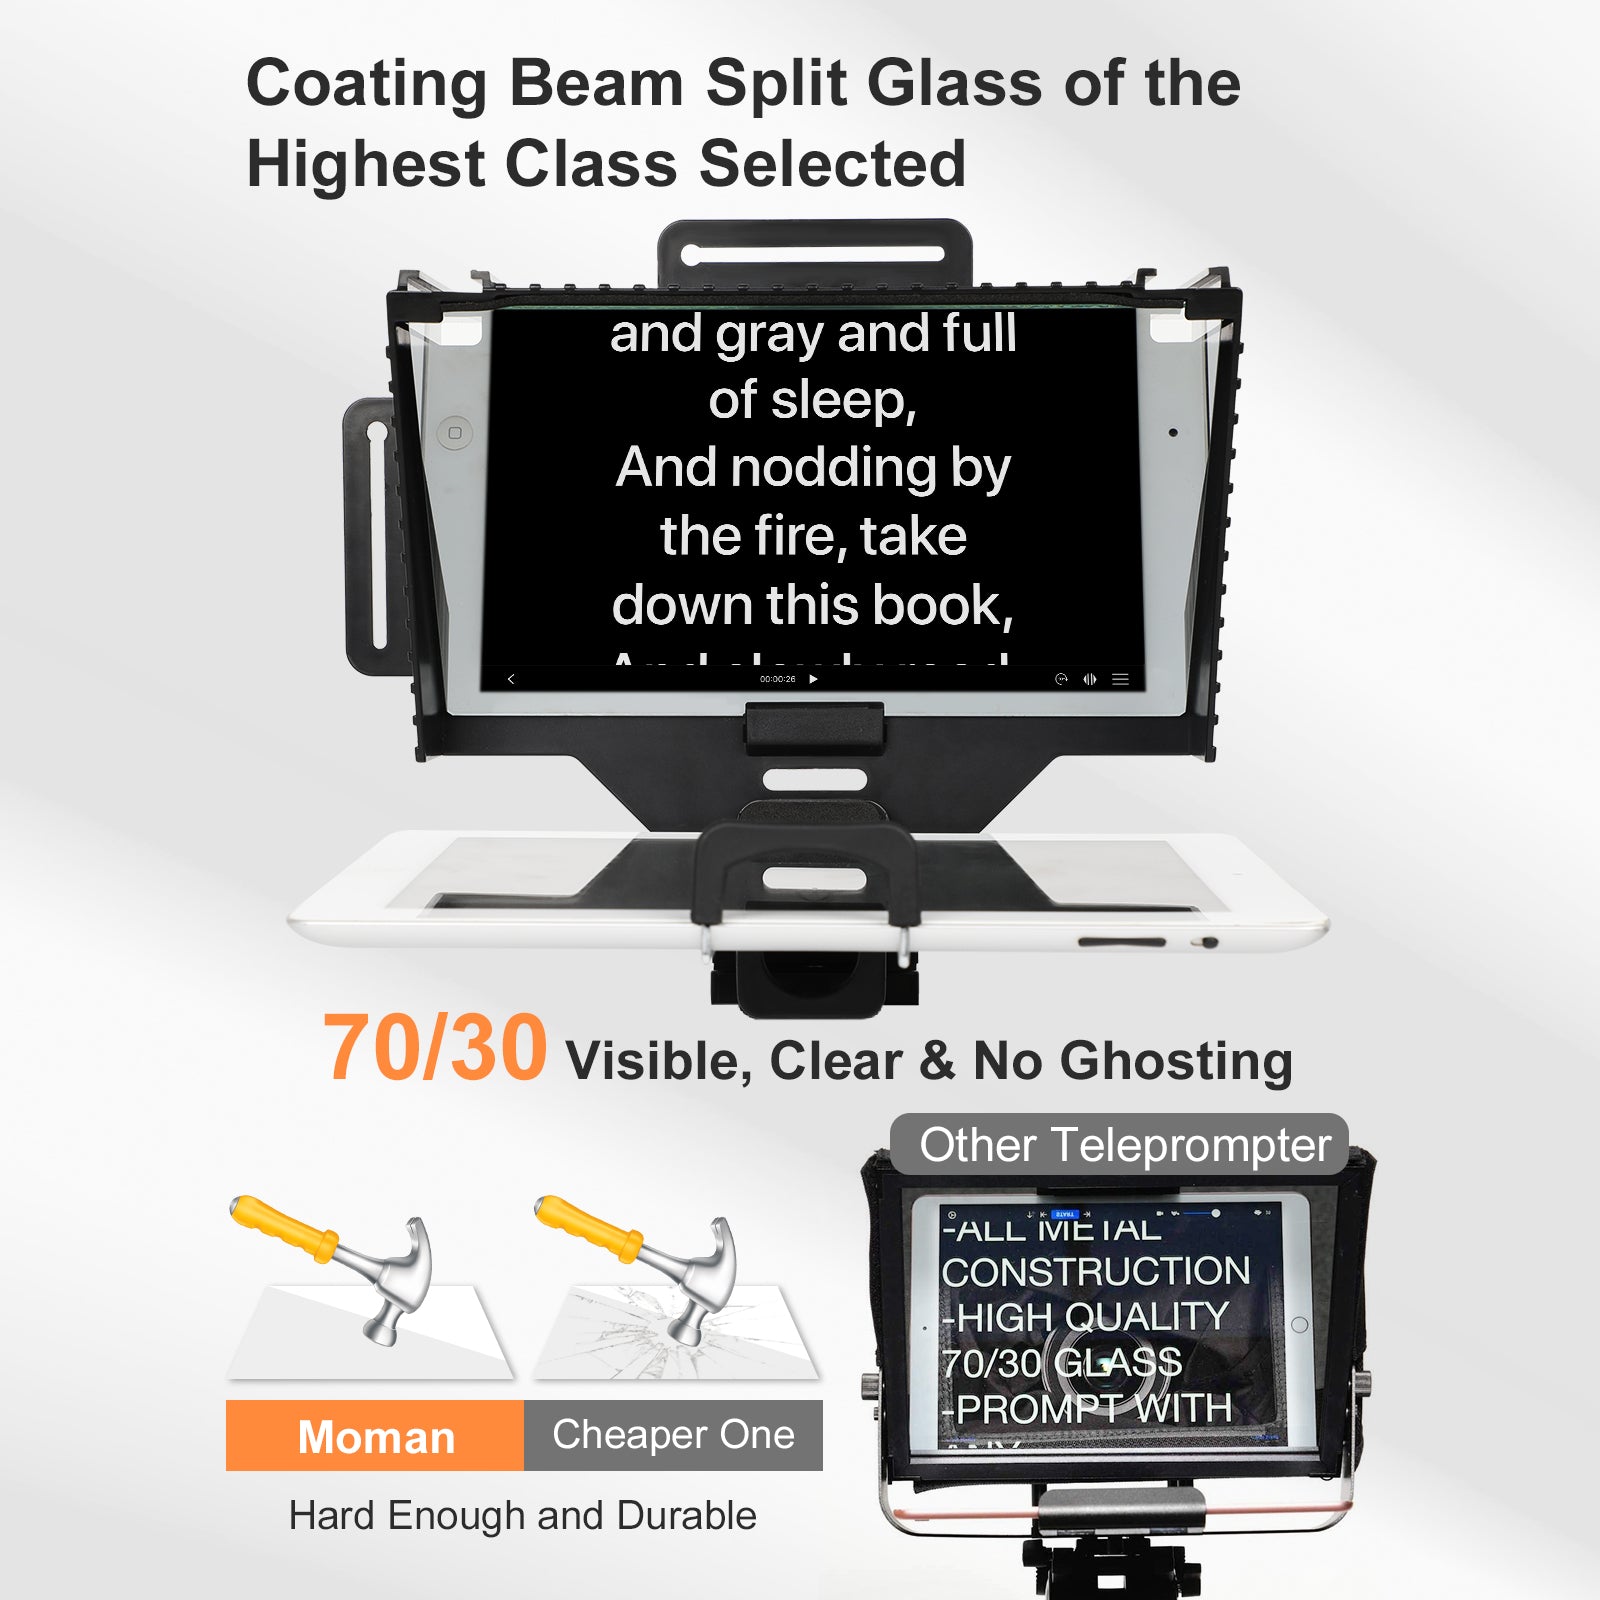 The coating beam split glass of Moman MT2 is clear, no ghosting and durable